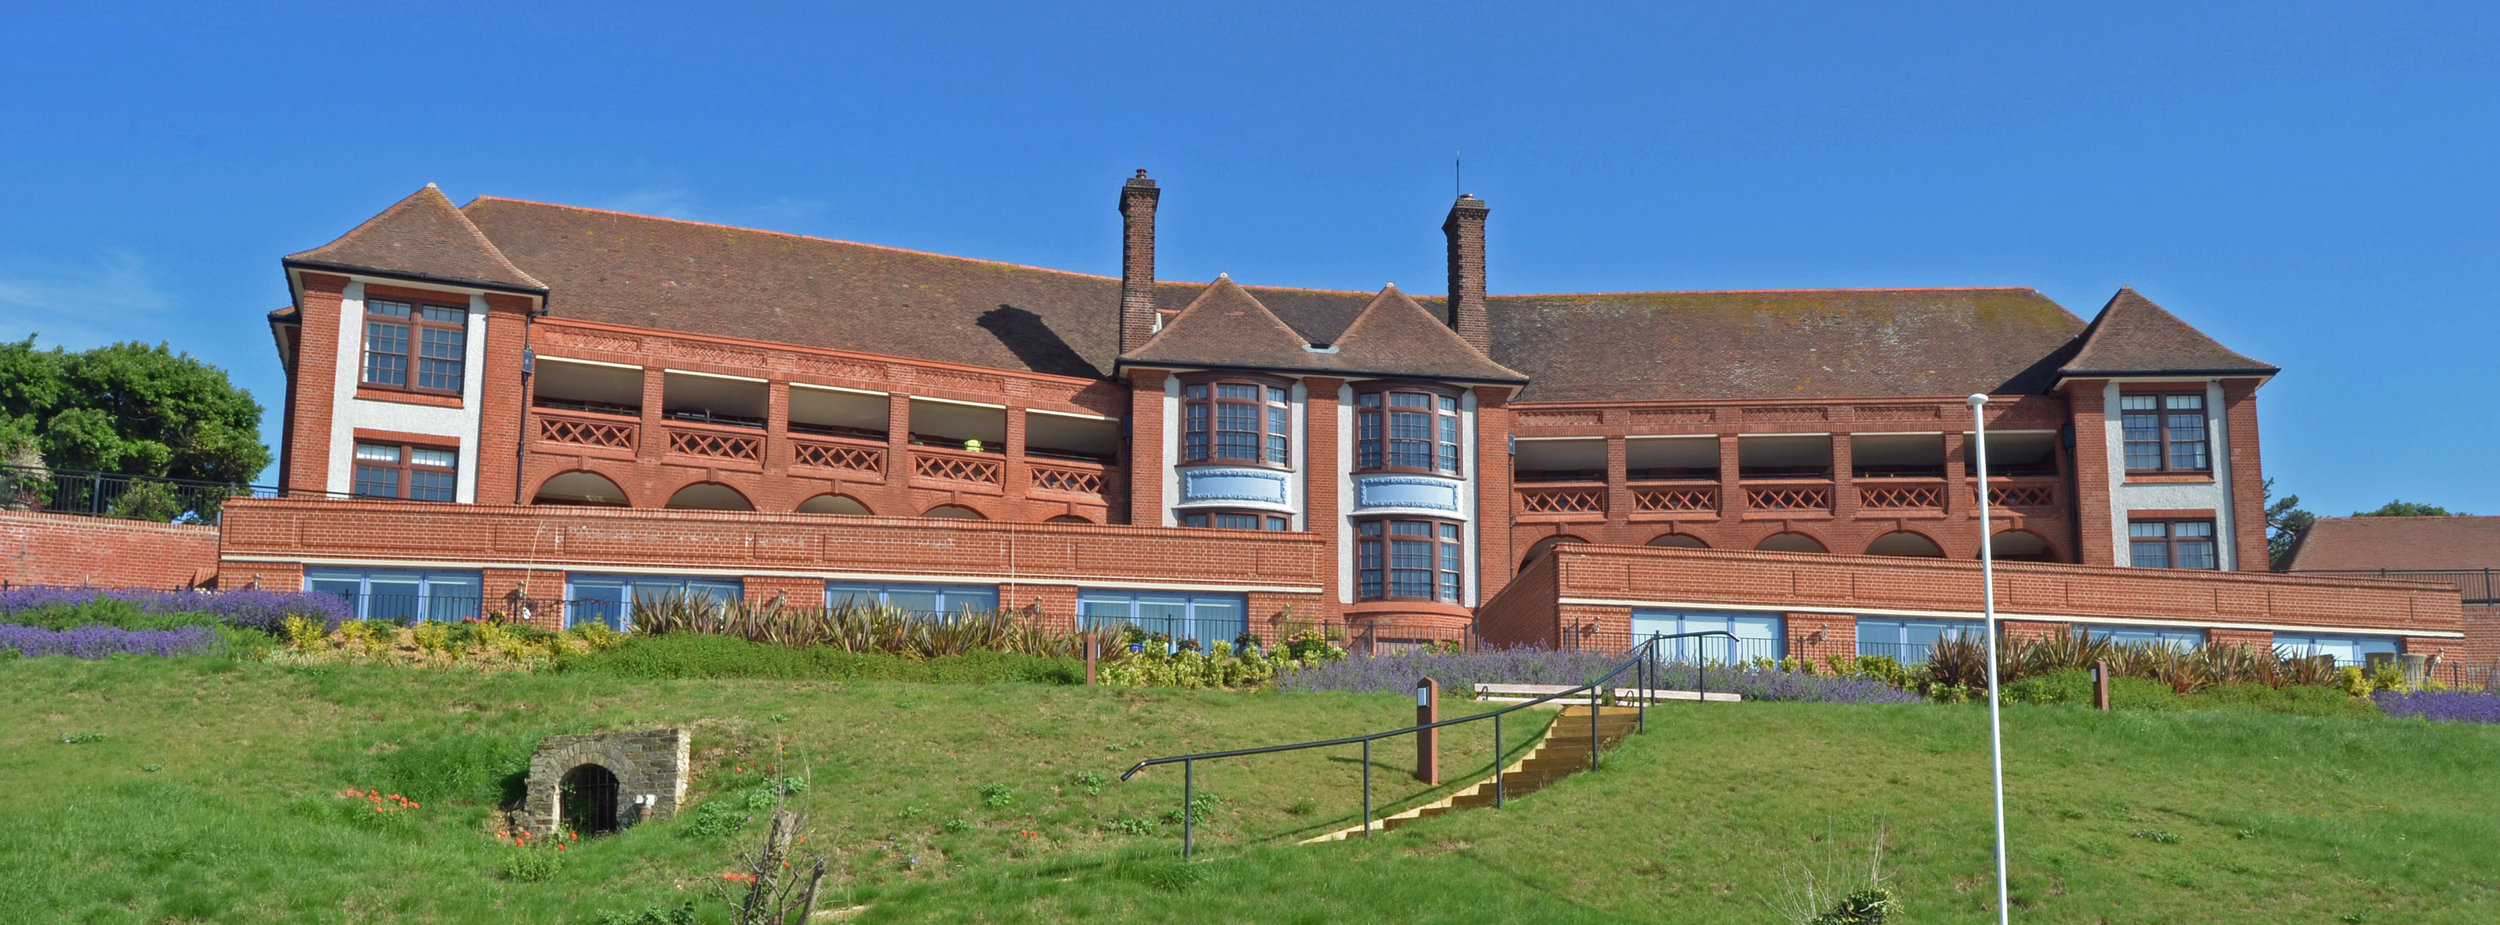   The Bartlet  Felixstowe   Winner of the RIBA Craftmanship Awards 2017, Restoration category.   Residential development of the former Grade II* listed Bartlet Hospital along with Cautley House to the west. The site is elevated on the north side of U